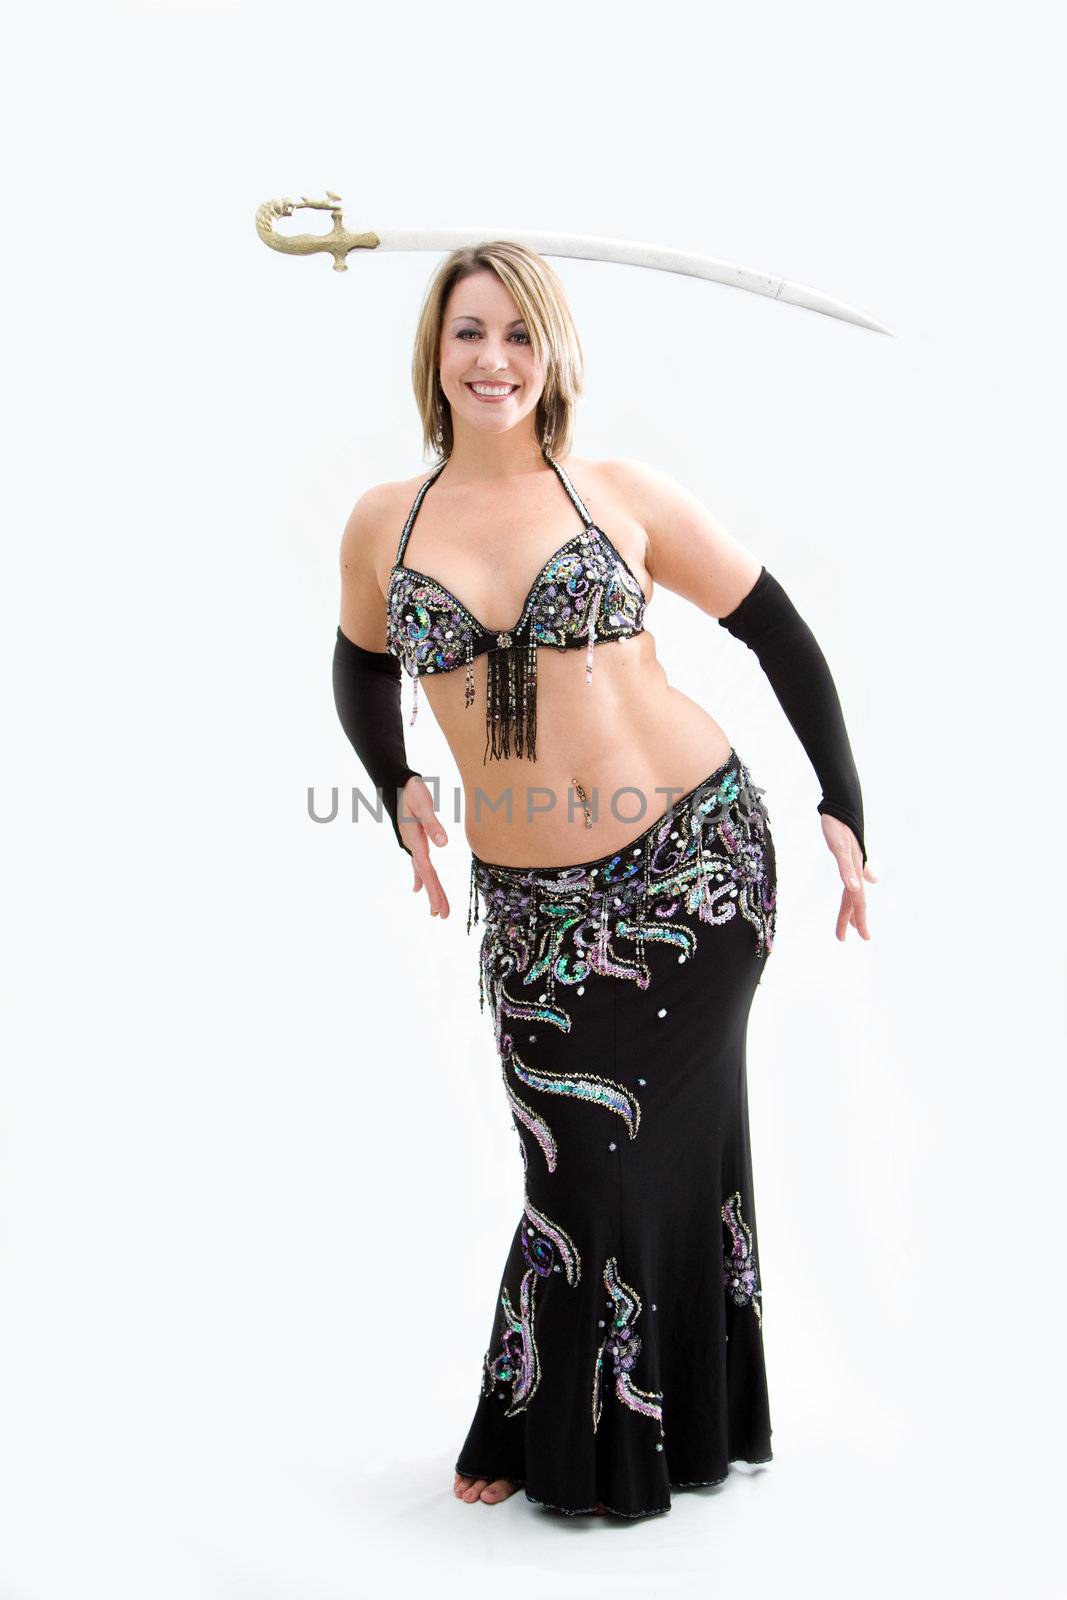 Beautiful belly dancer in black outfit balancing sword, isolated